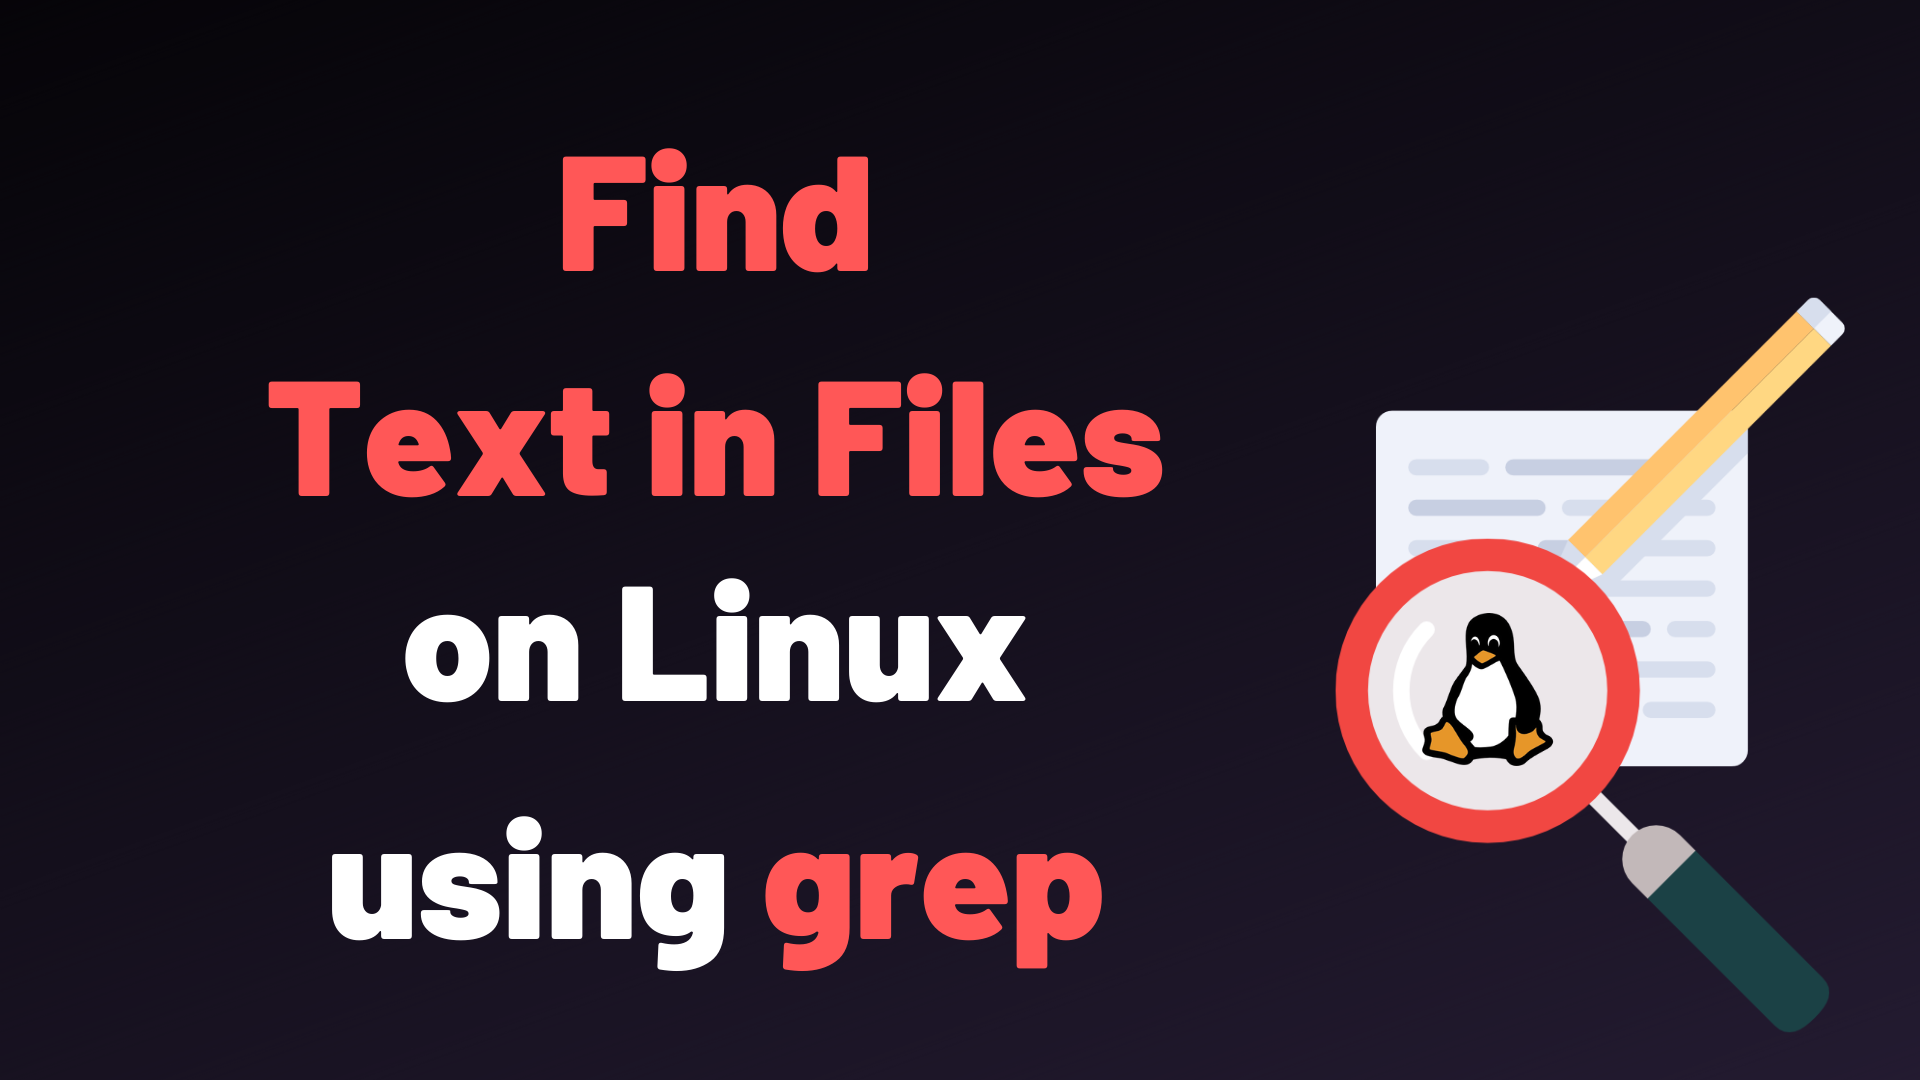 Find Text in Files on Linux using grep